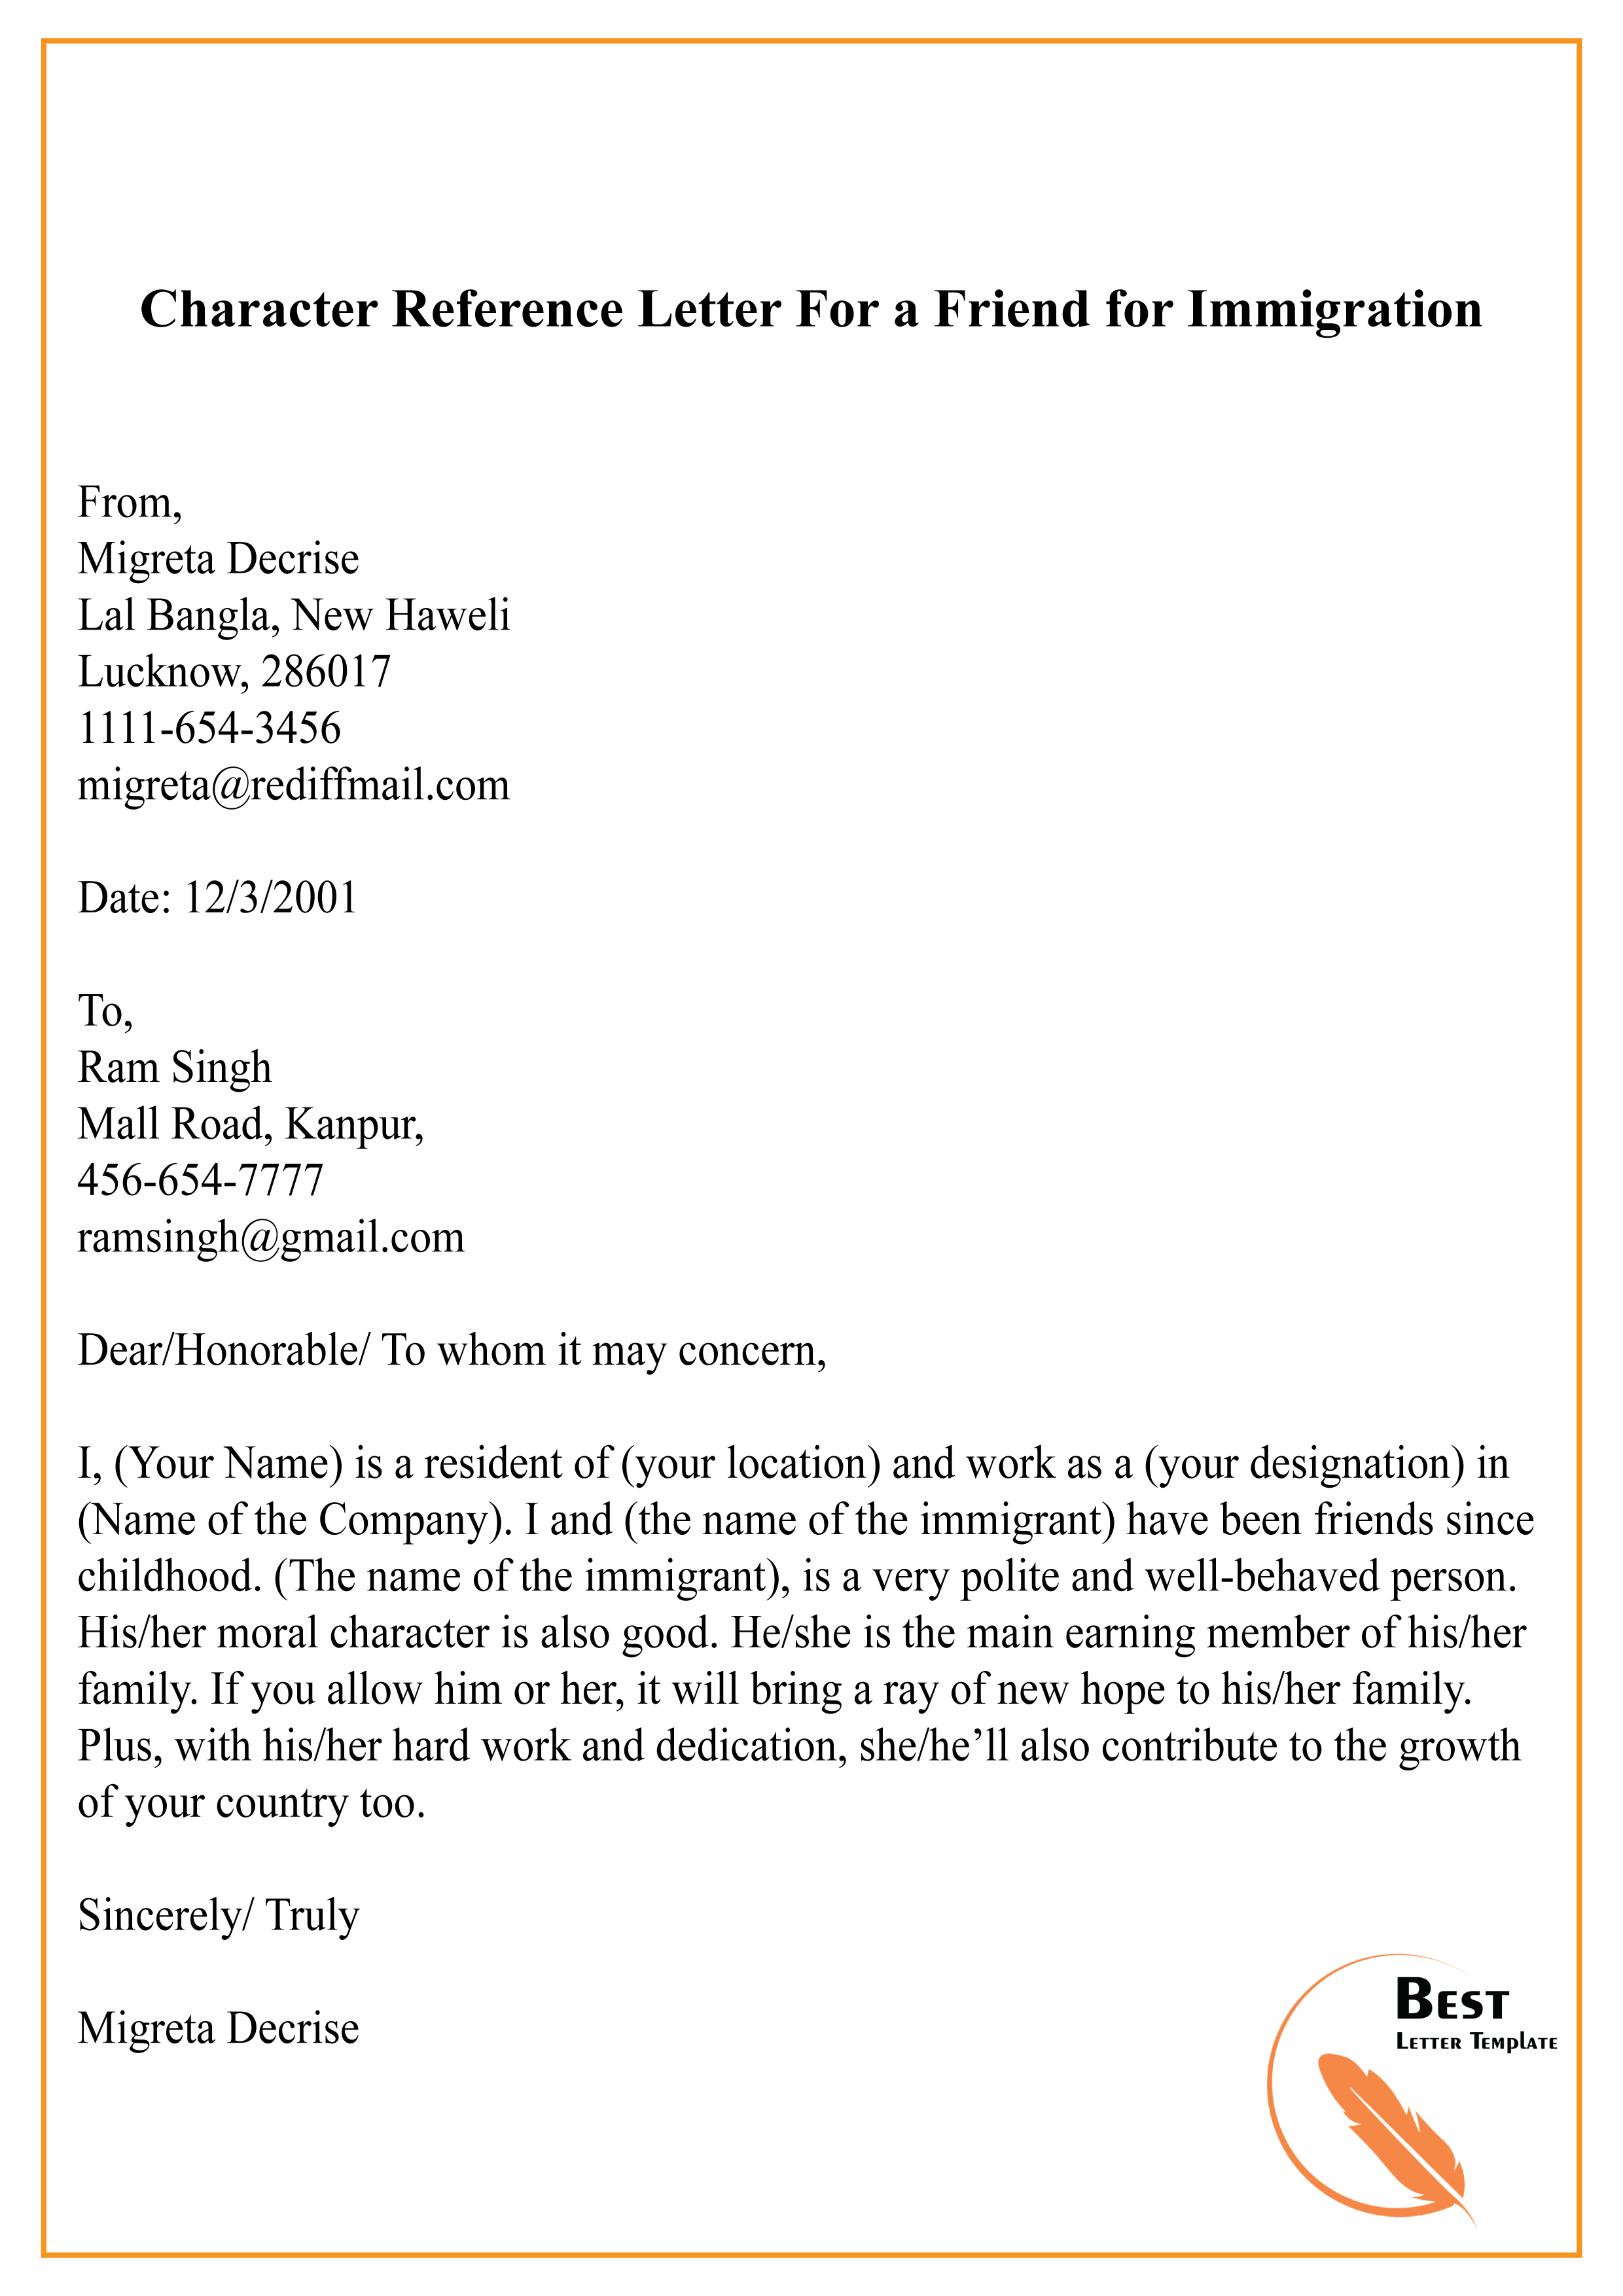 Character Reference Letter For A Friend For Immigration 01 